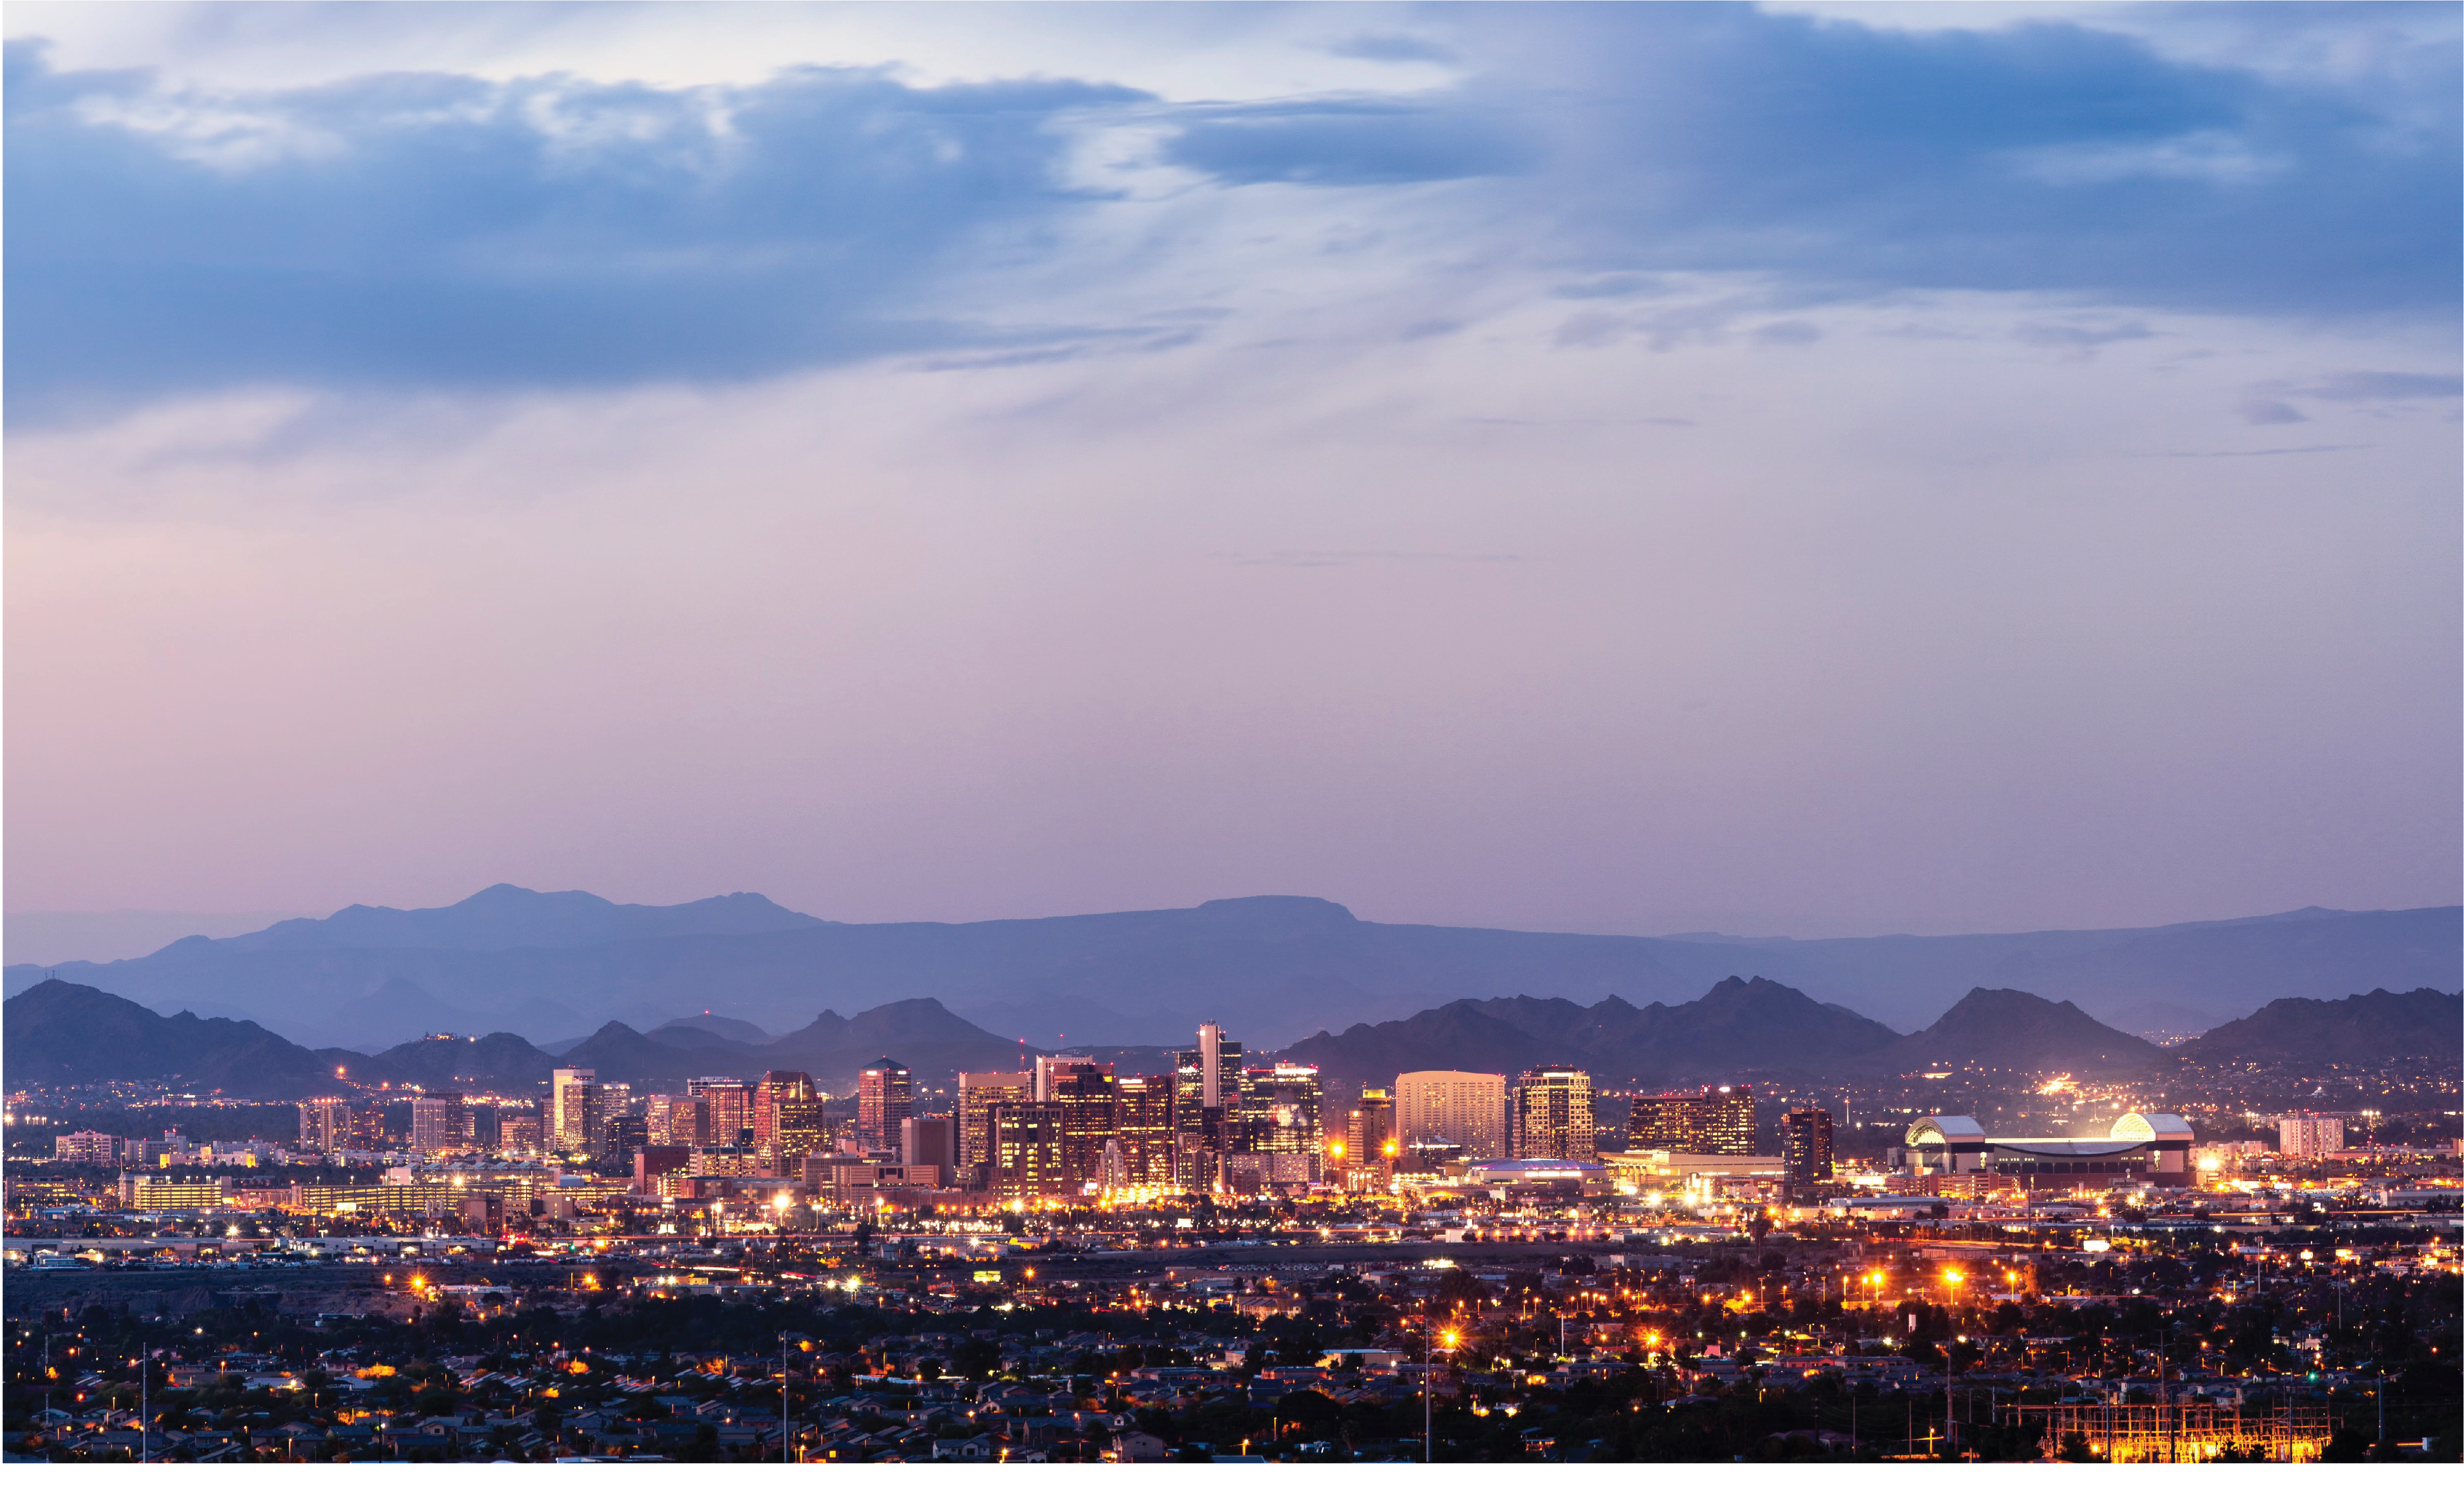 With the business attraction efforts setting records for the organization, it’s no surprise that the Greater Phoenix is touted as one of the hottest job growth markets in the country.